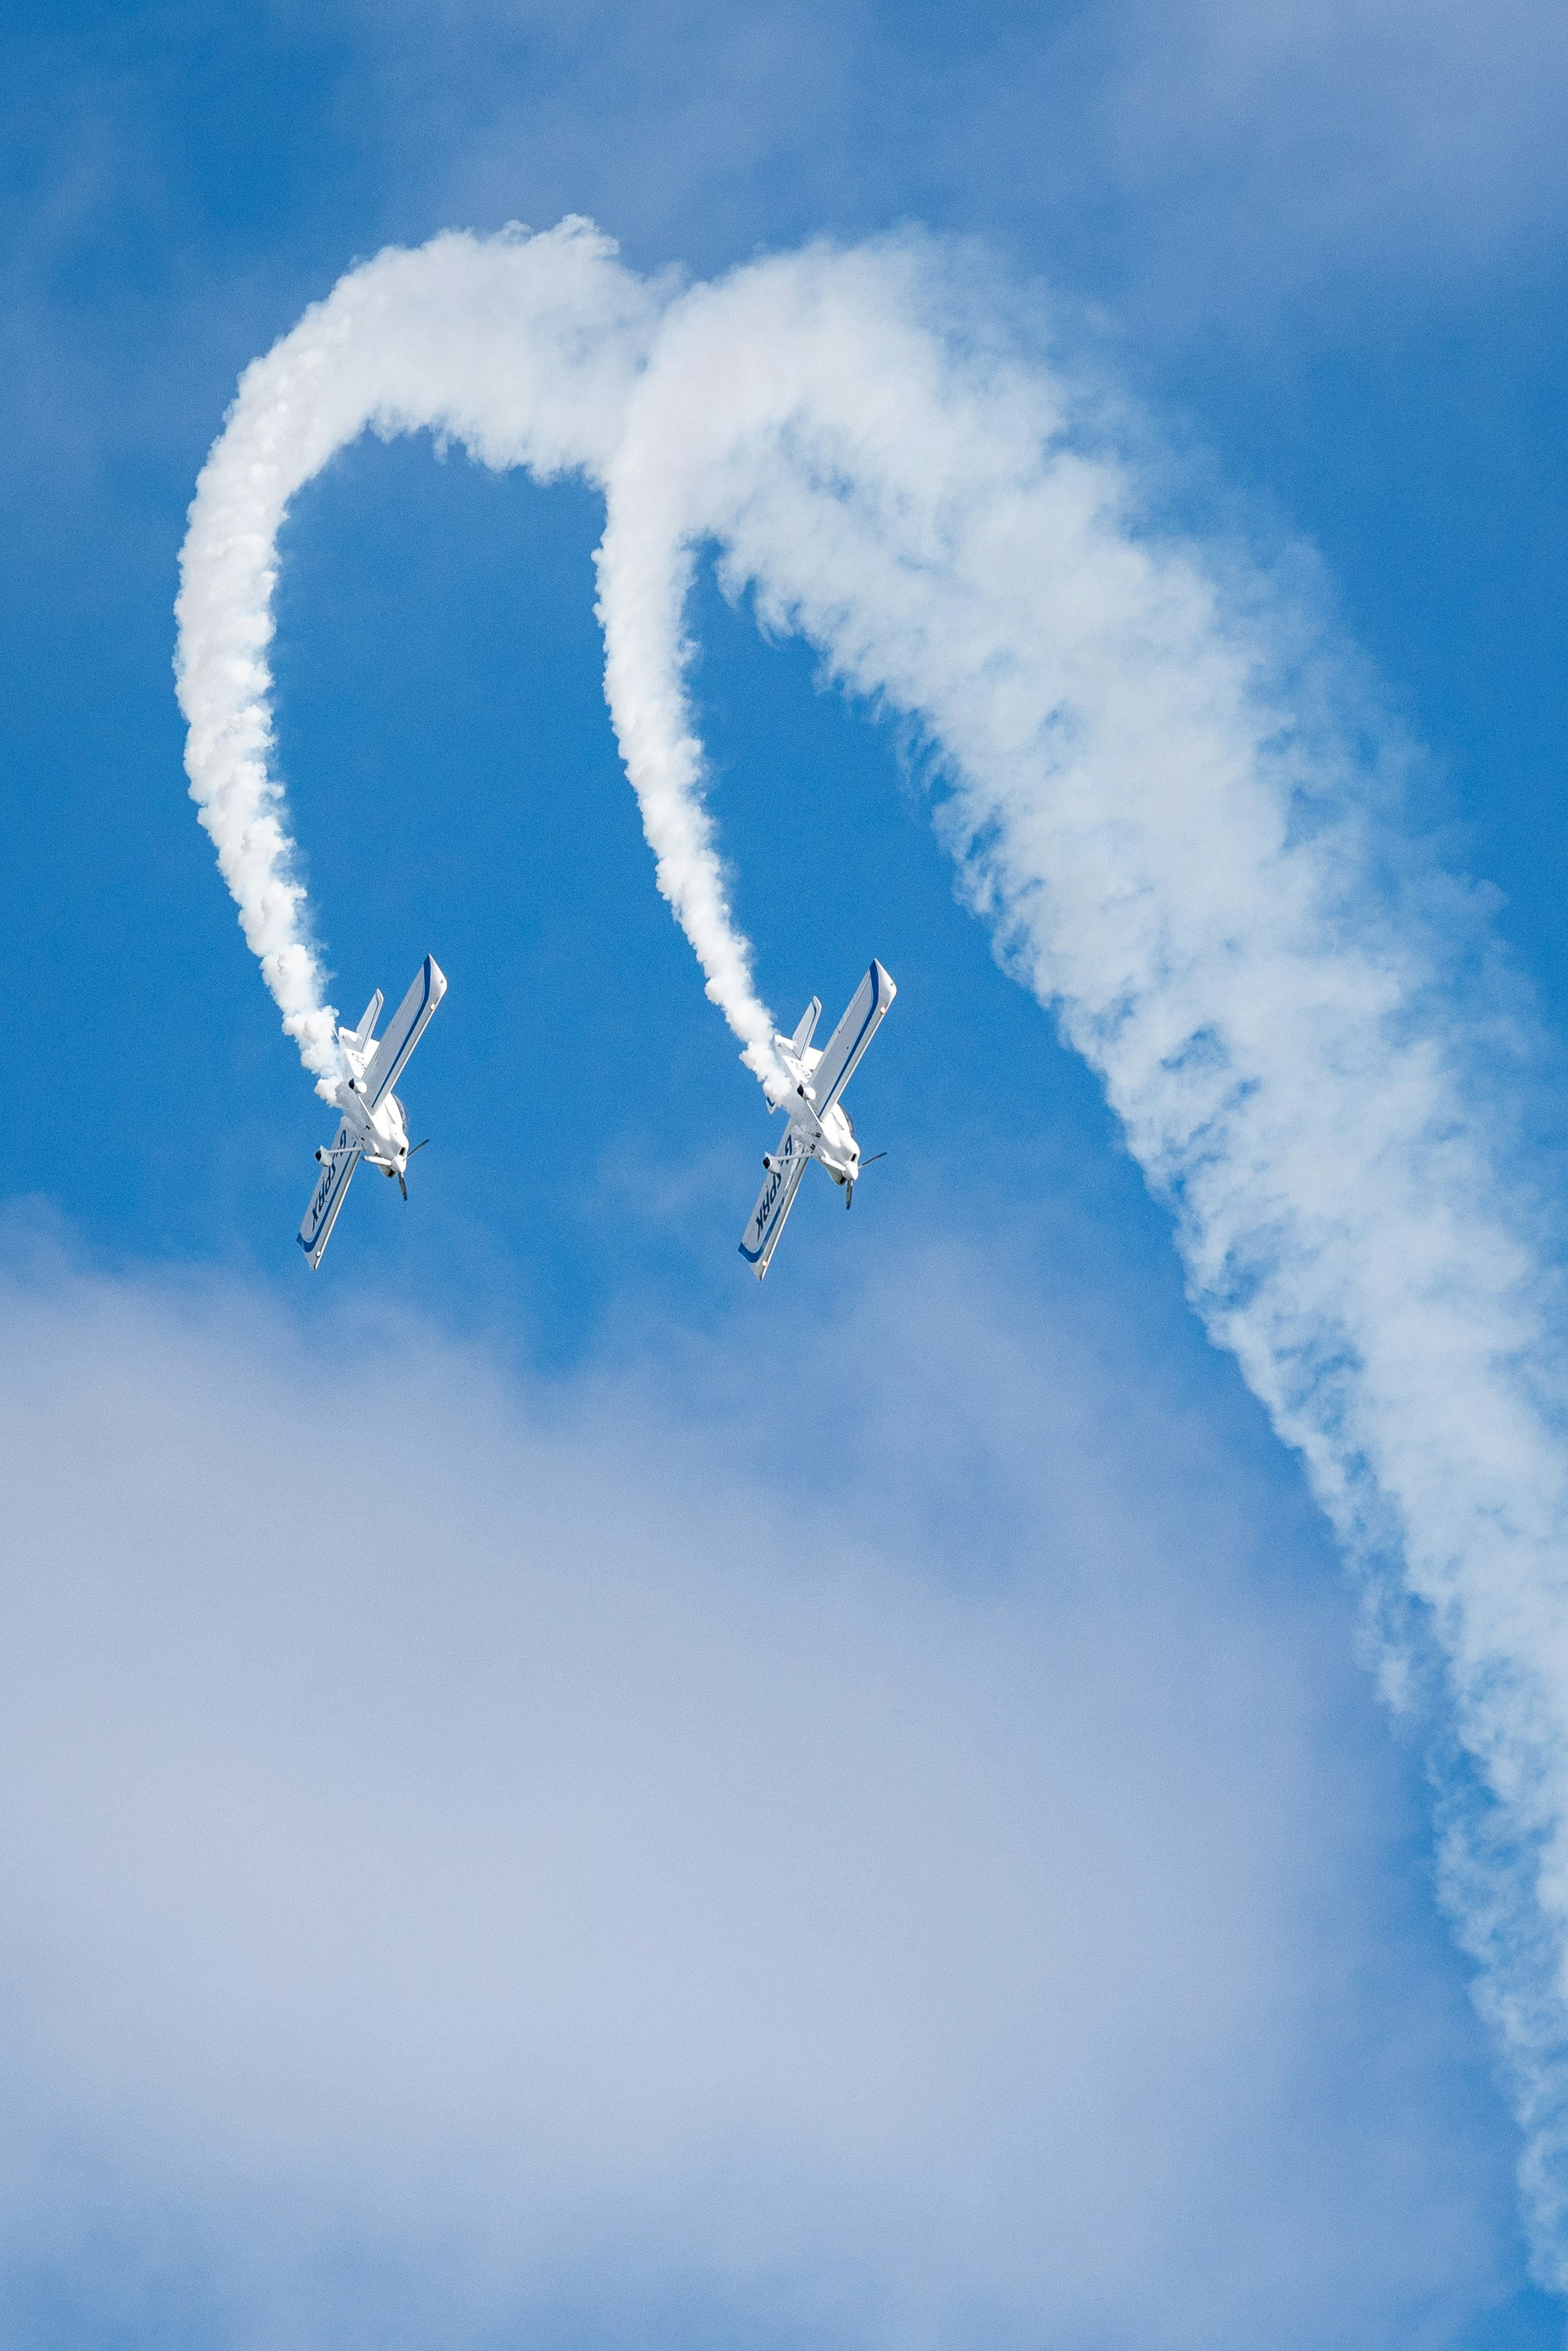 two white airliners under blue sky